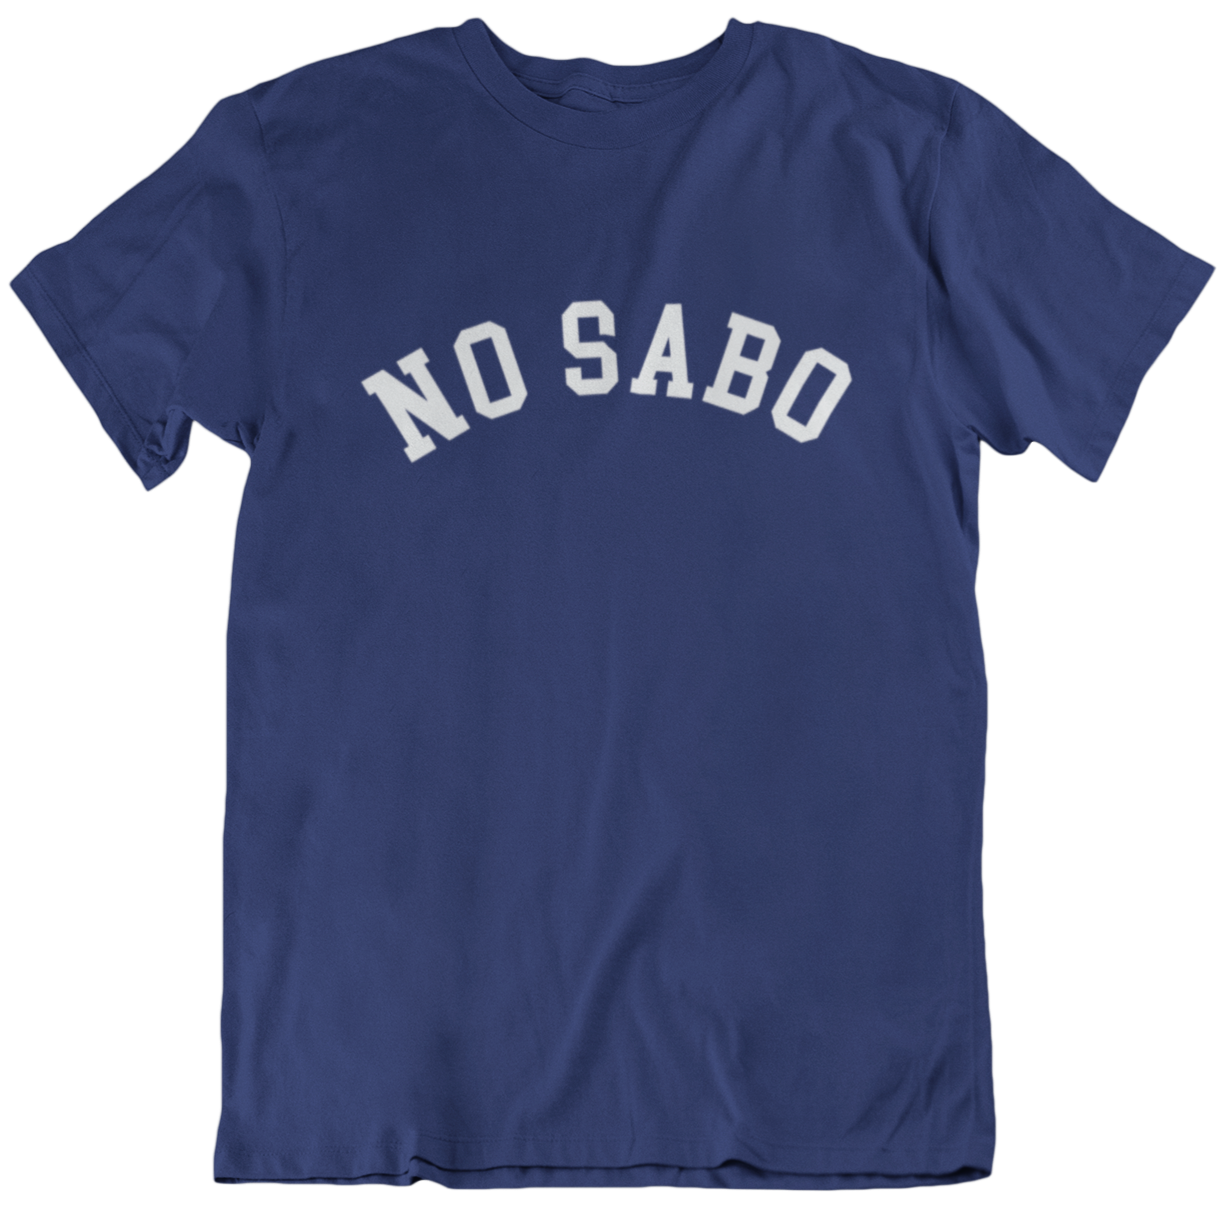 funny navy blue t-shirt for latinos and chicanos. in bold white lettering the shirt states "no sabo" in honor of no sabo kids